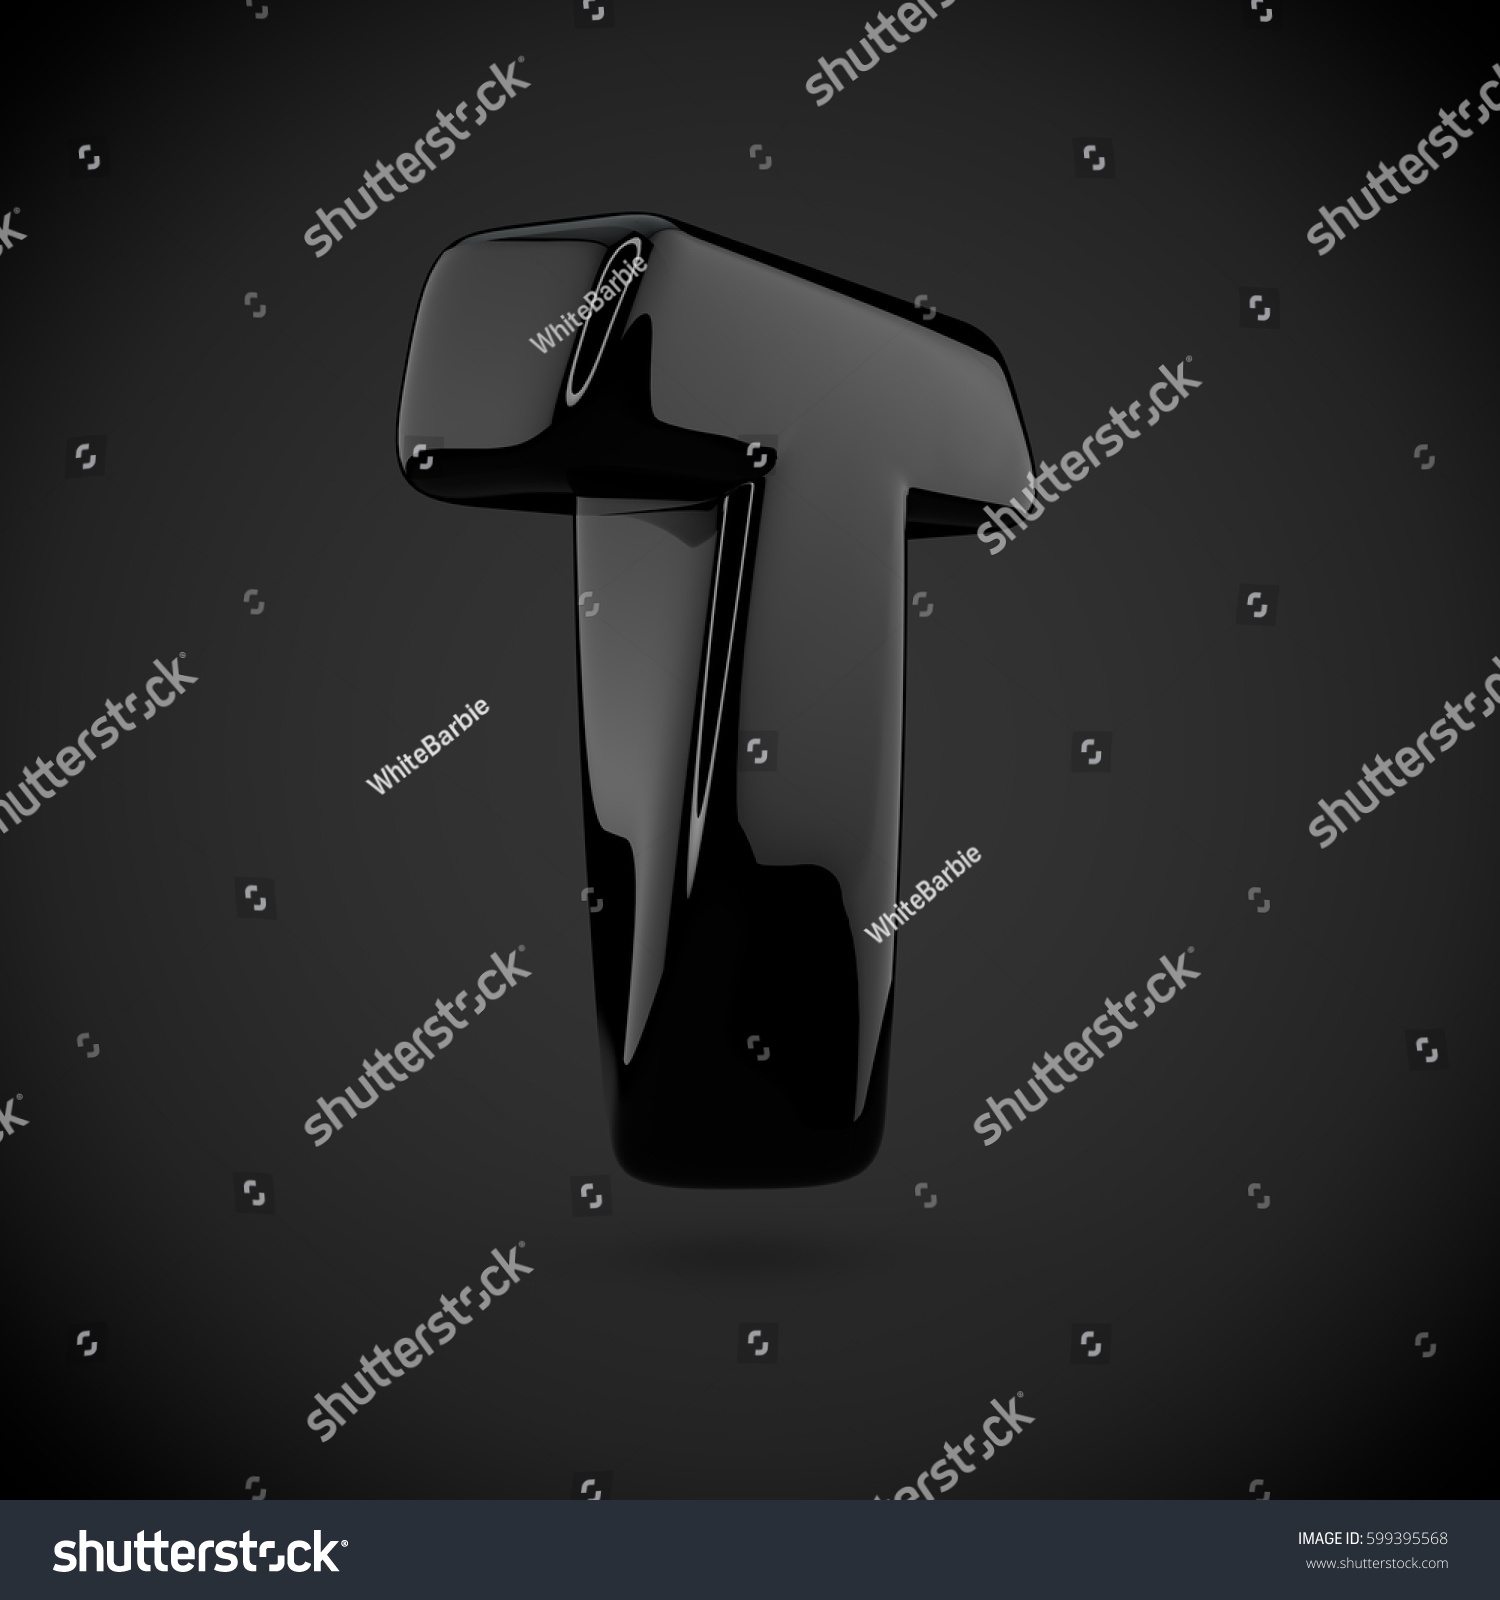 Royalty Free Stock Illustration Of Glossy Black Paint Letter T